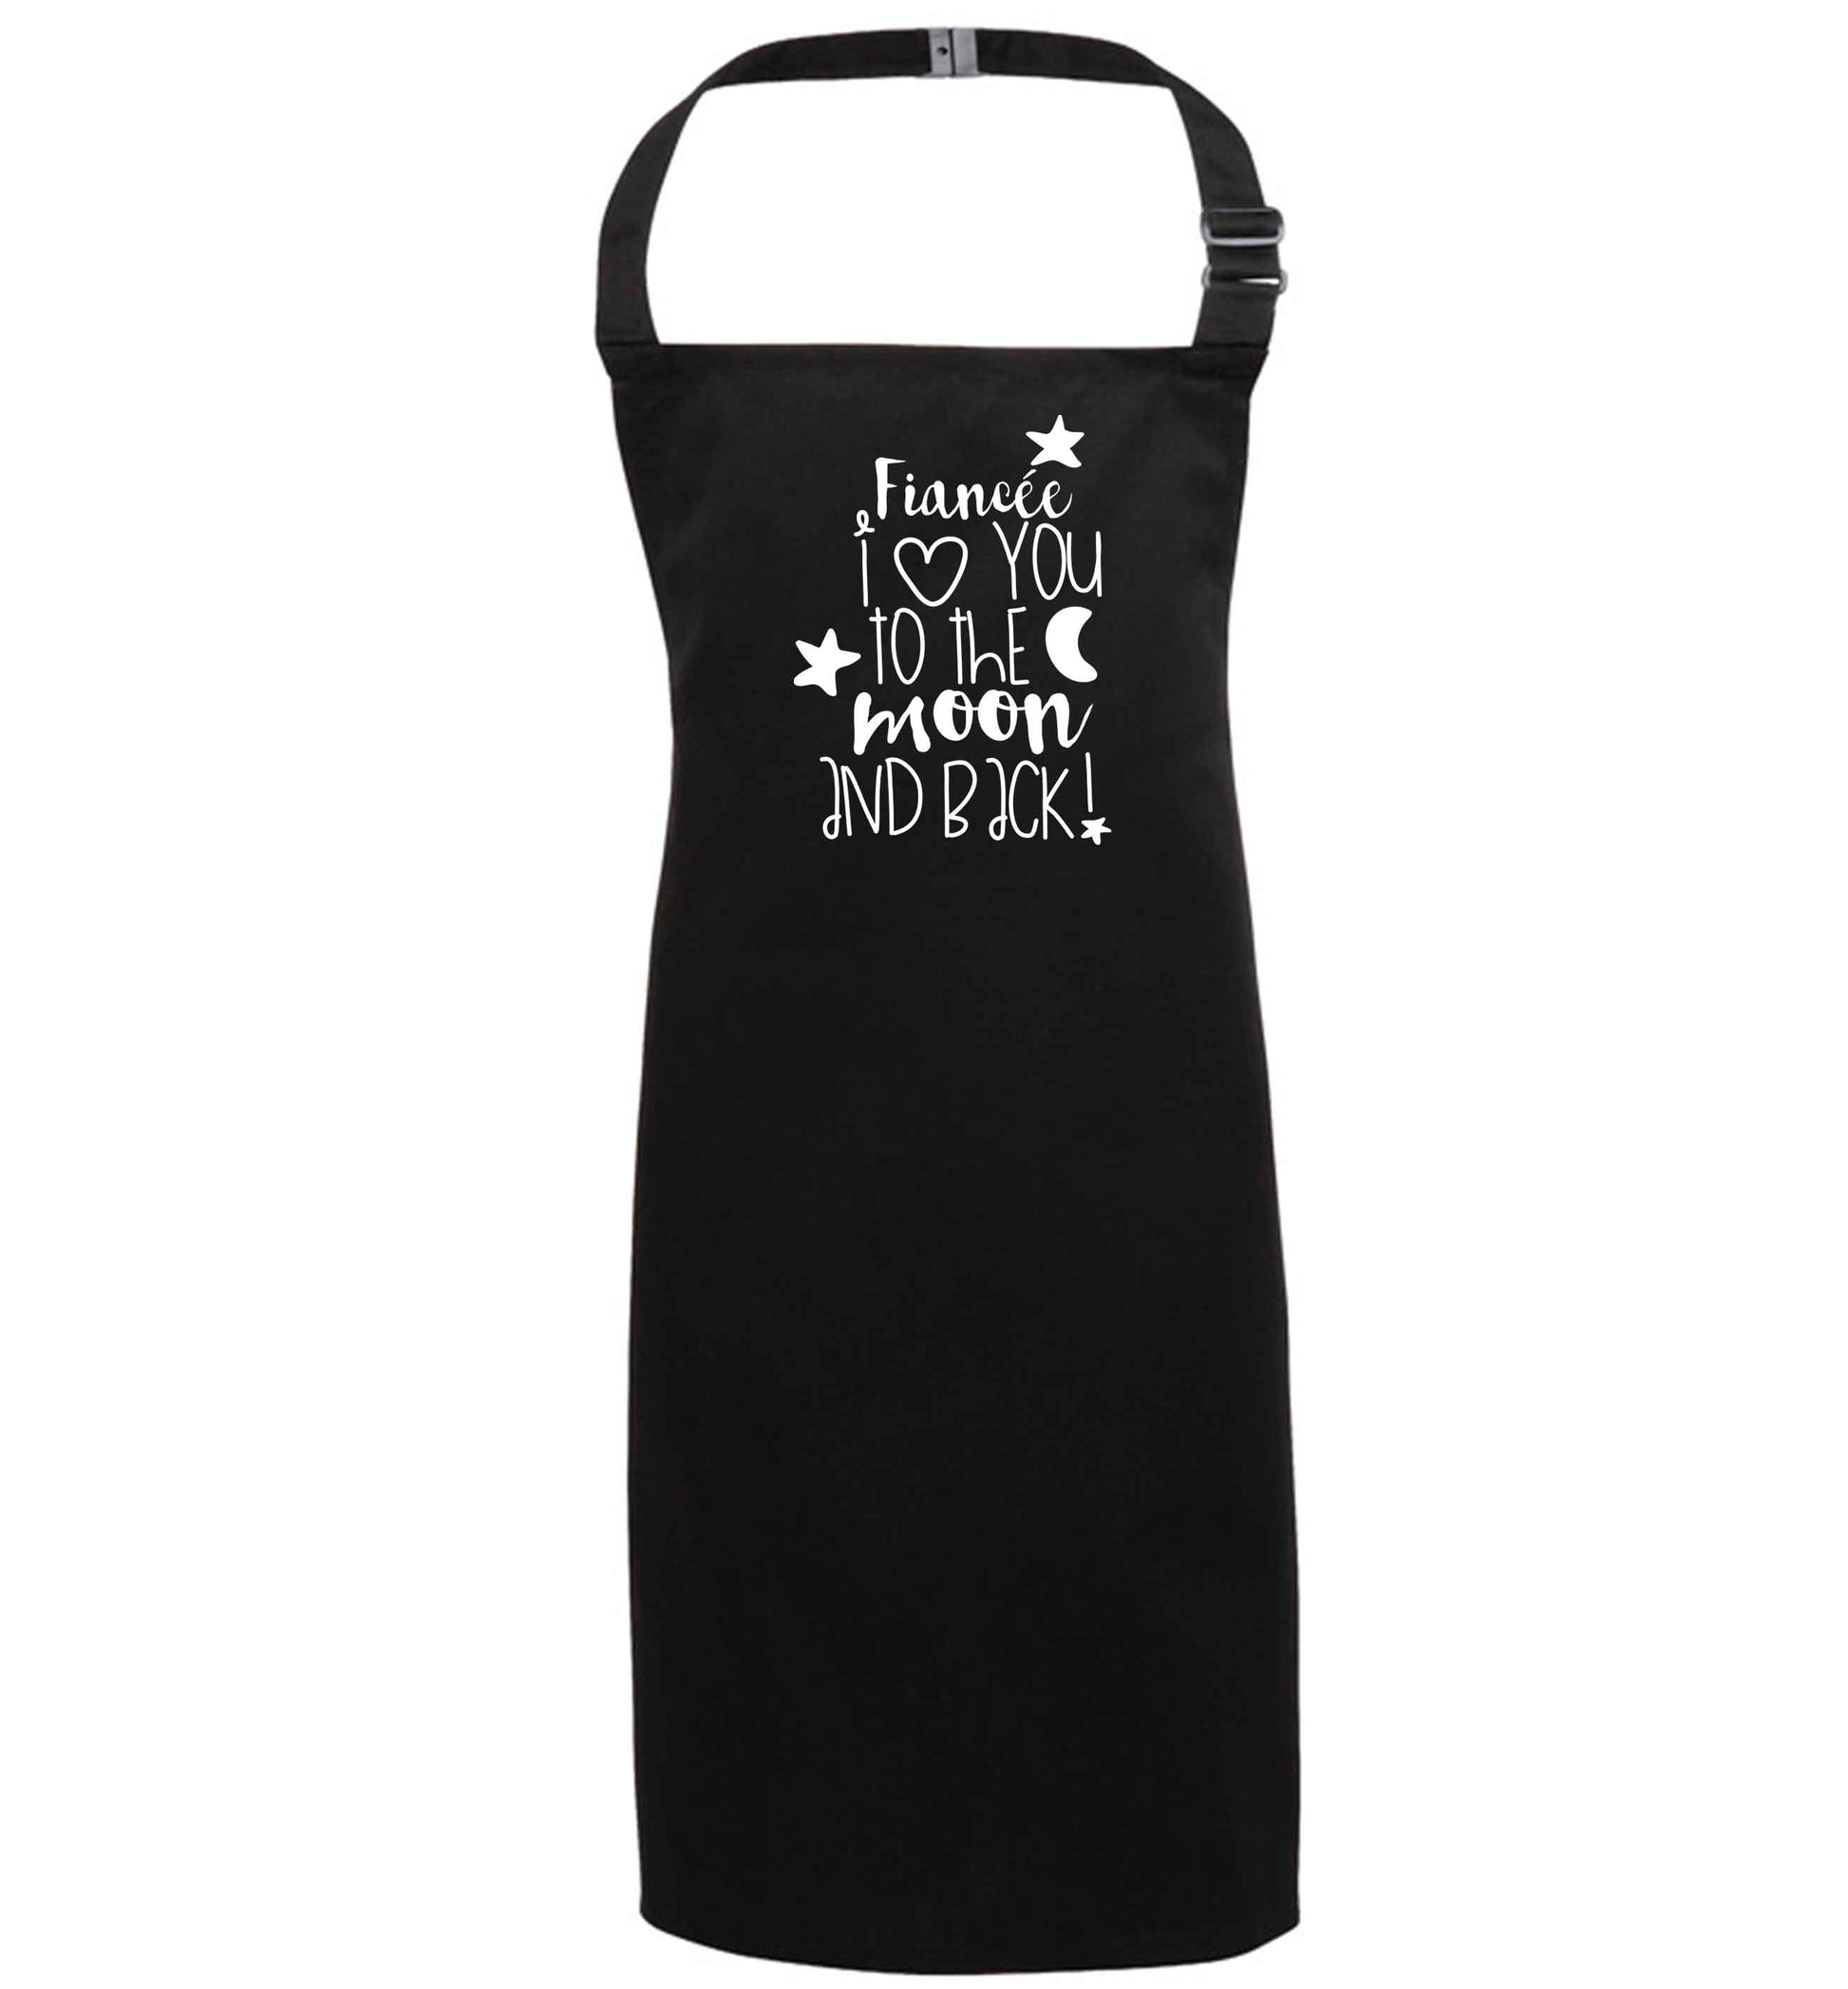 Fiancée I love you to the moon and back black apron 7-10 years